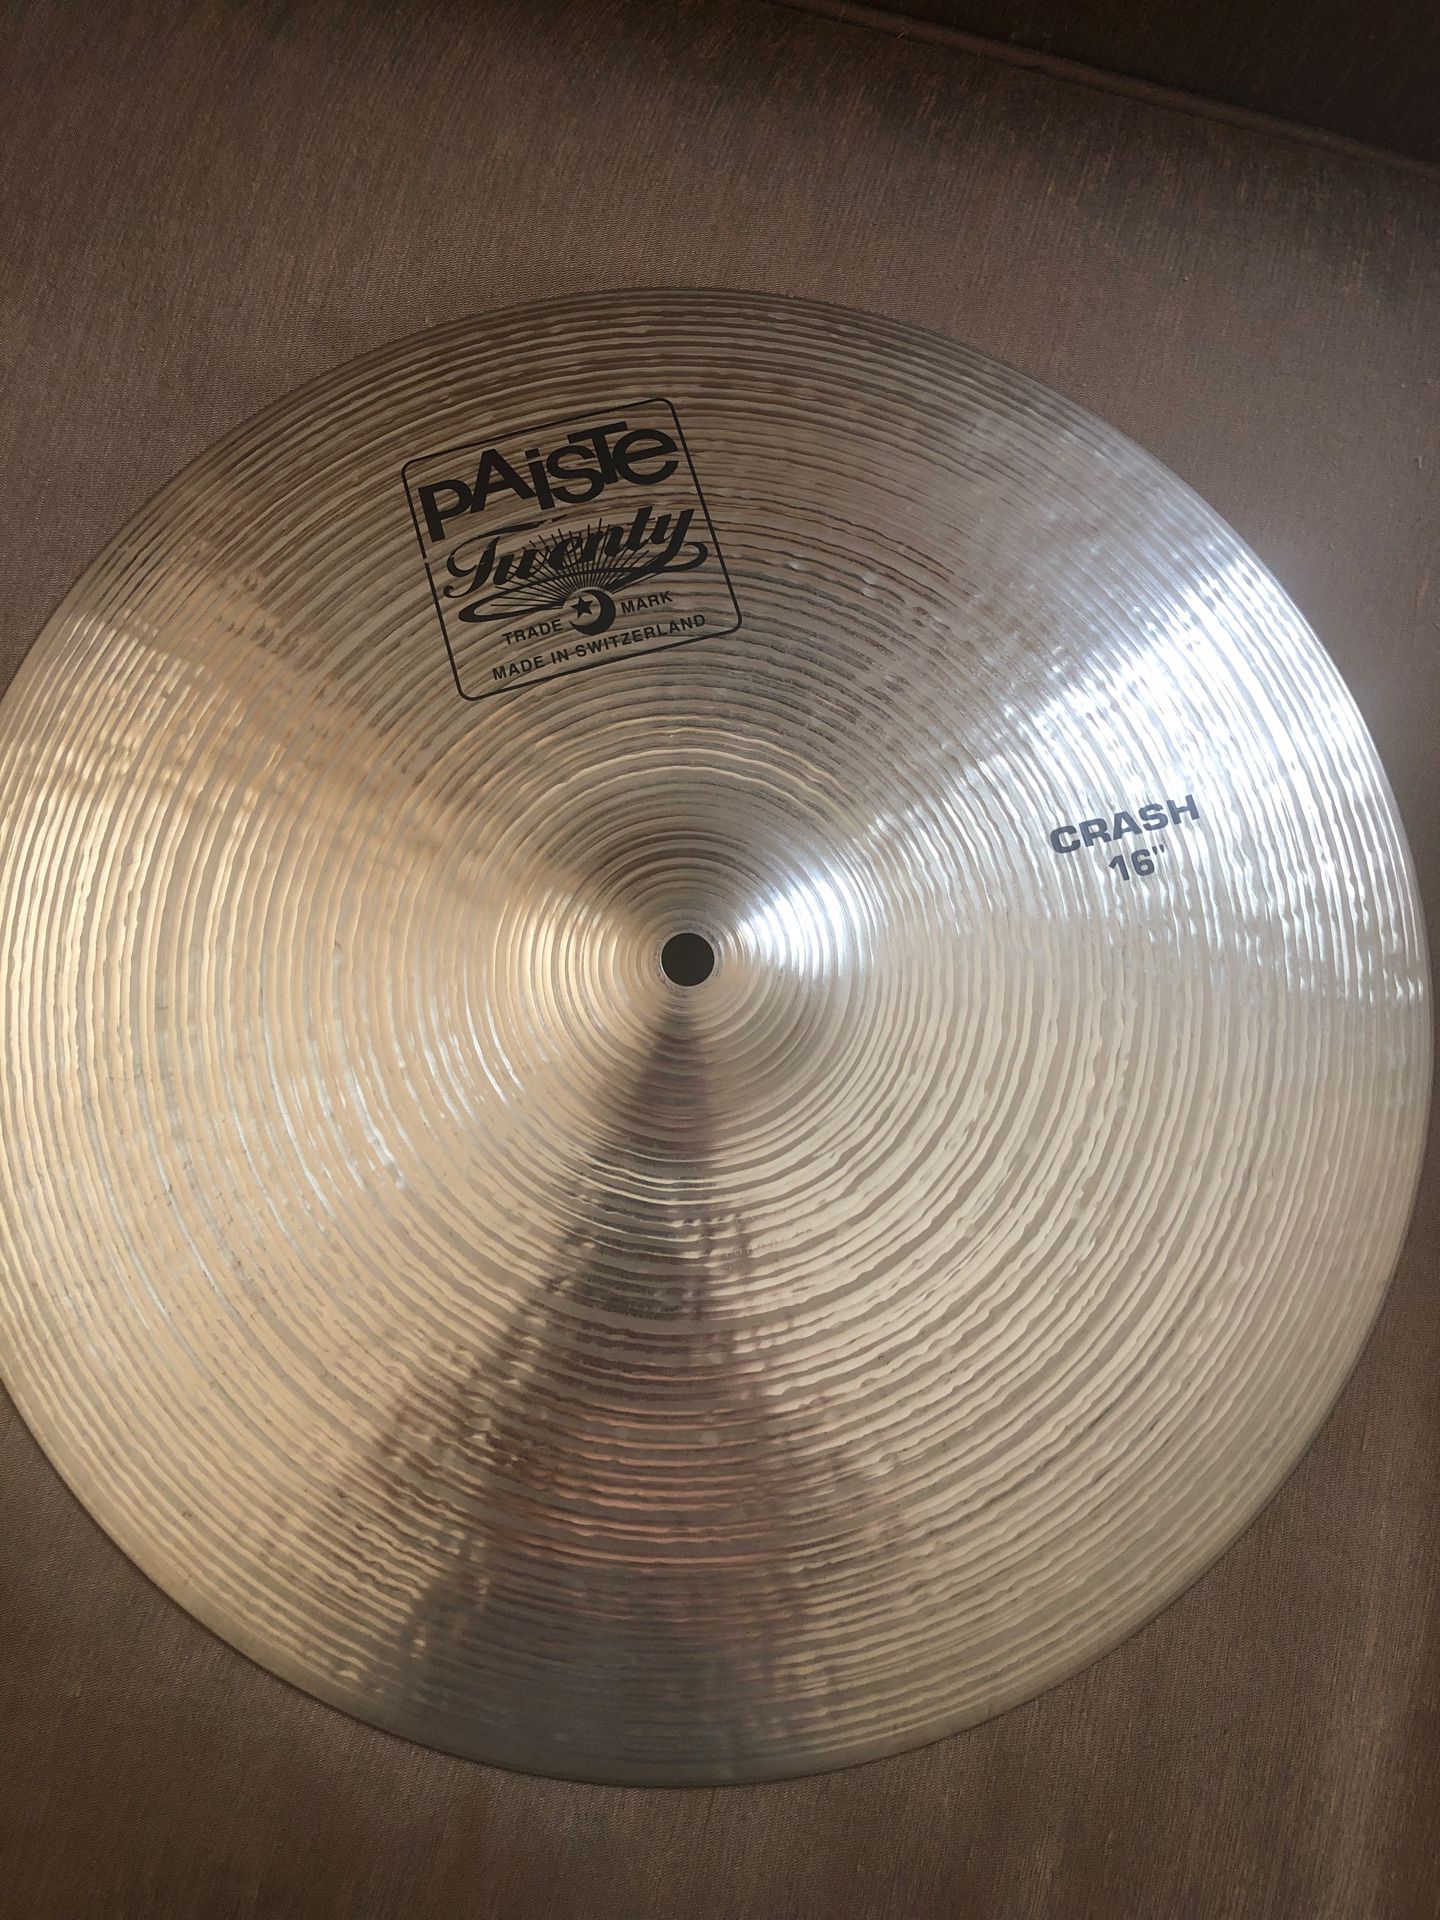 Cymbal 16 crash, PAISTE. Excellent condition like new.